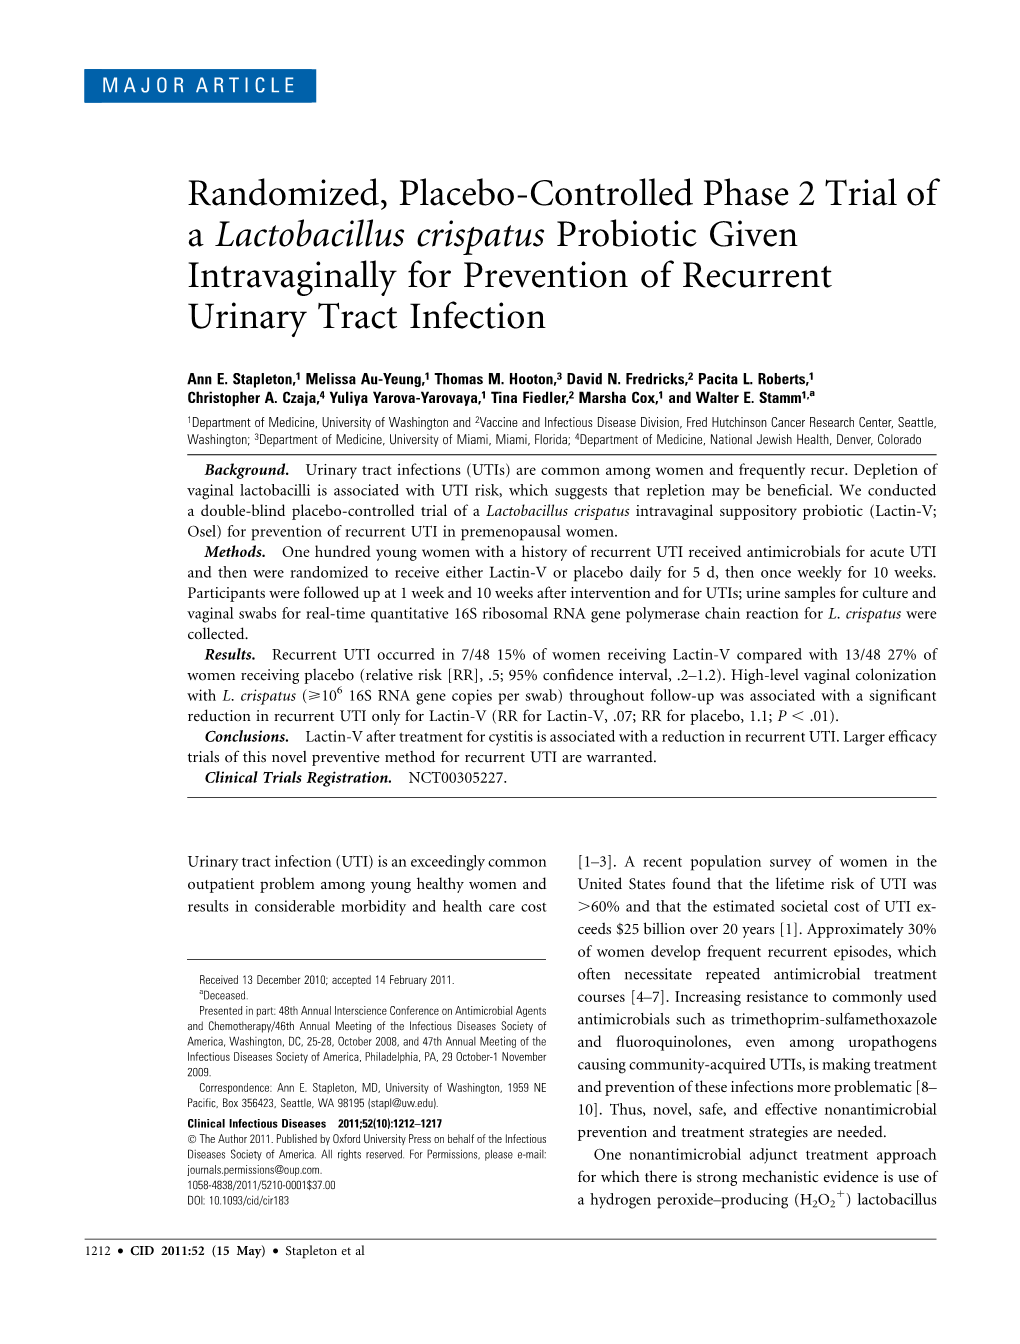 Randomized, Placebo-Controlled Phase 2 Trial of a Lactobacillus Crispatus Probiotic Given Intravaginally for Prevention of Recurrent Urinary Tract Infection